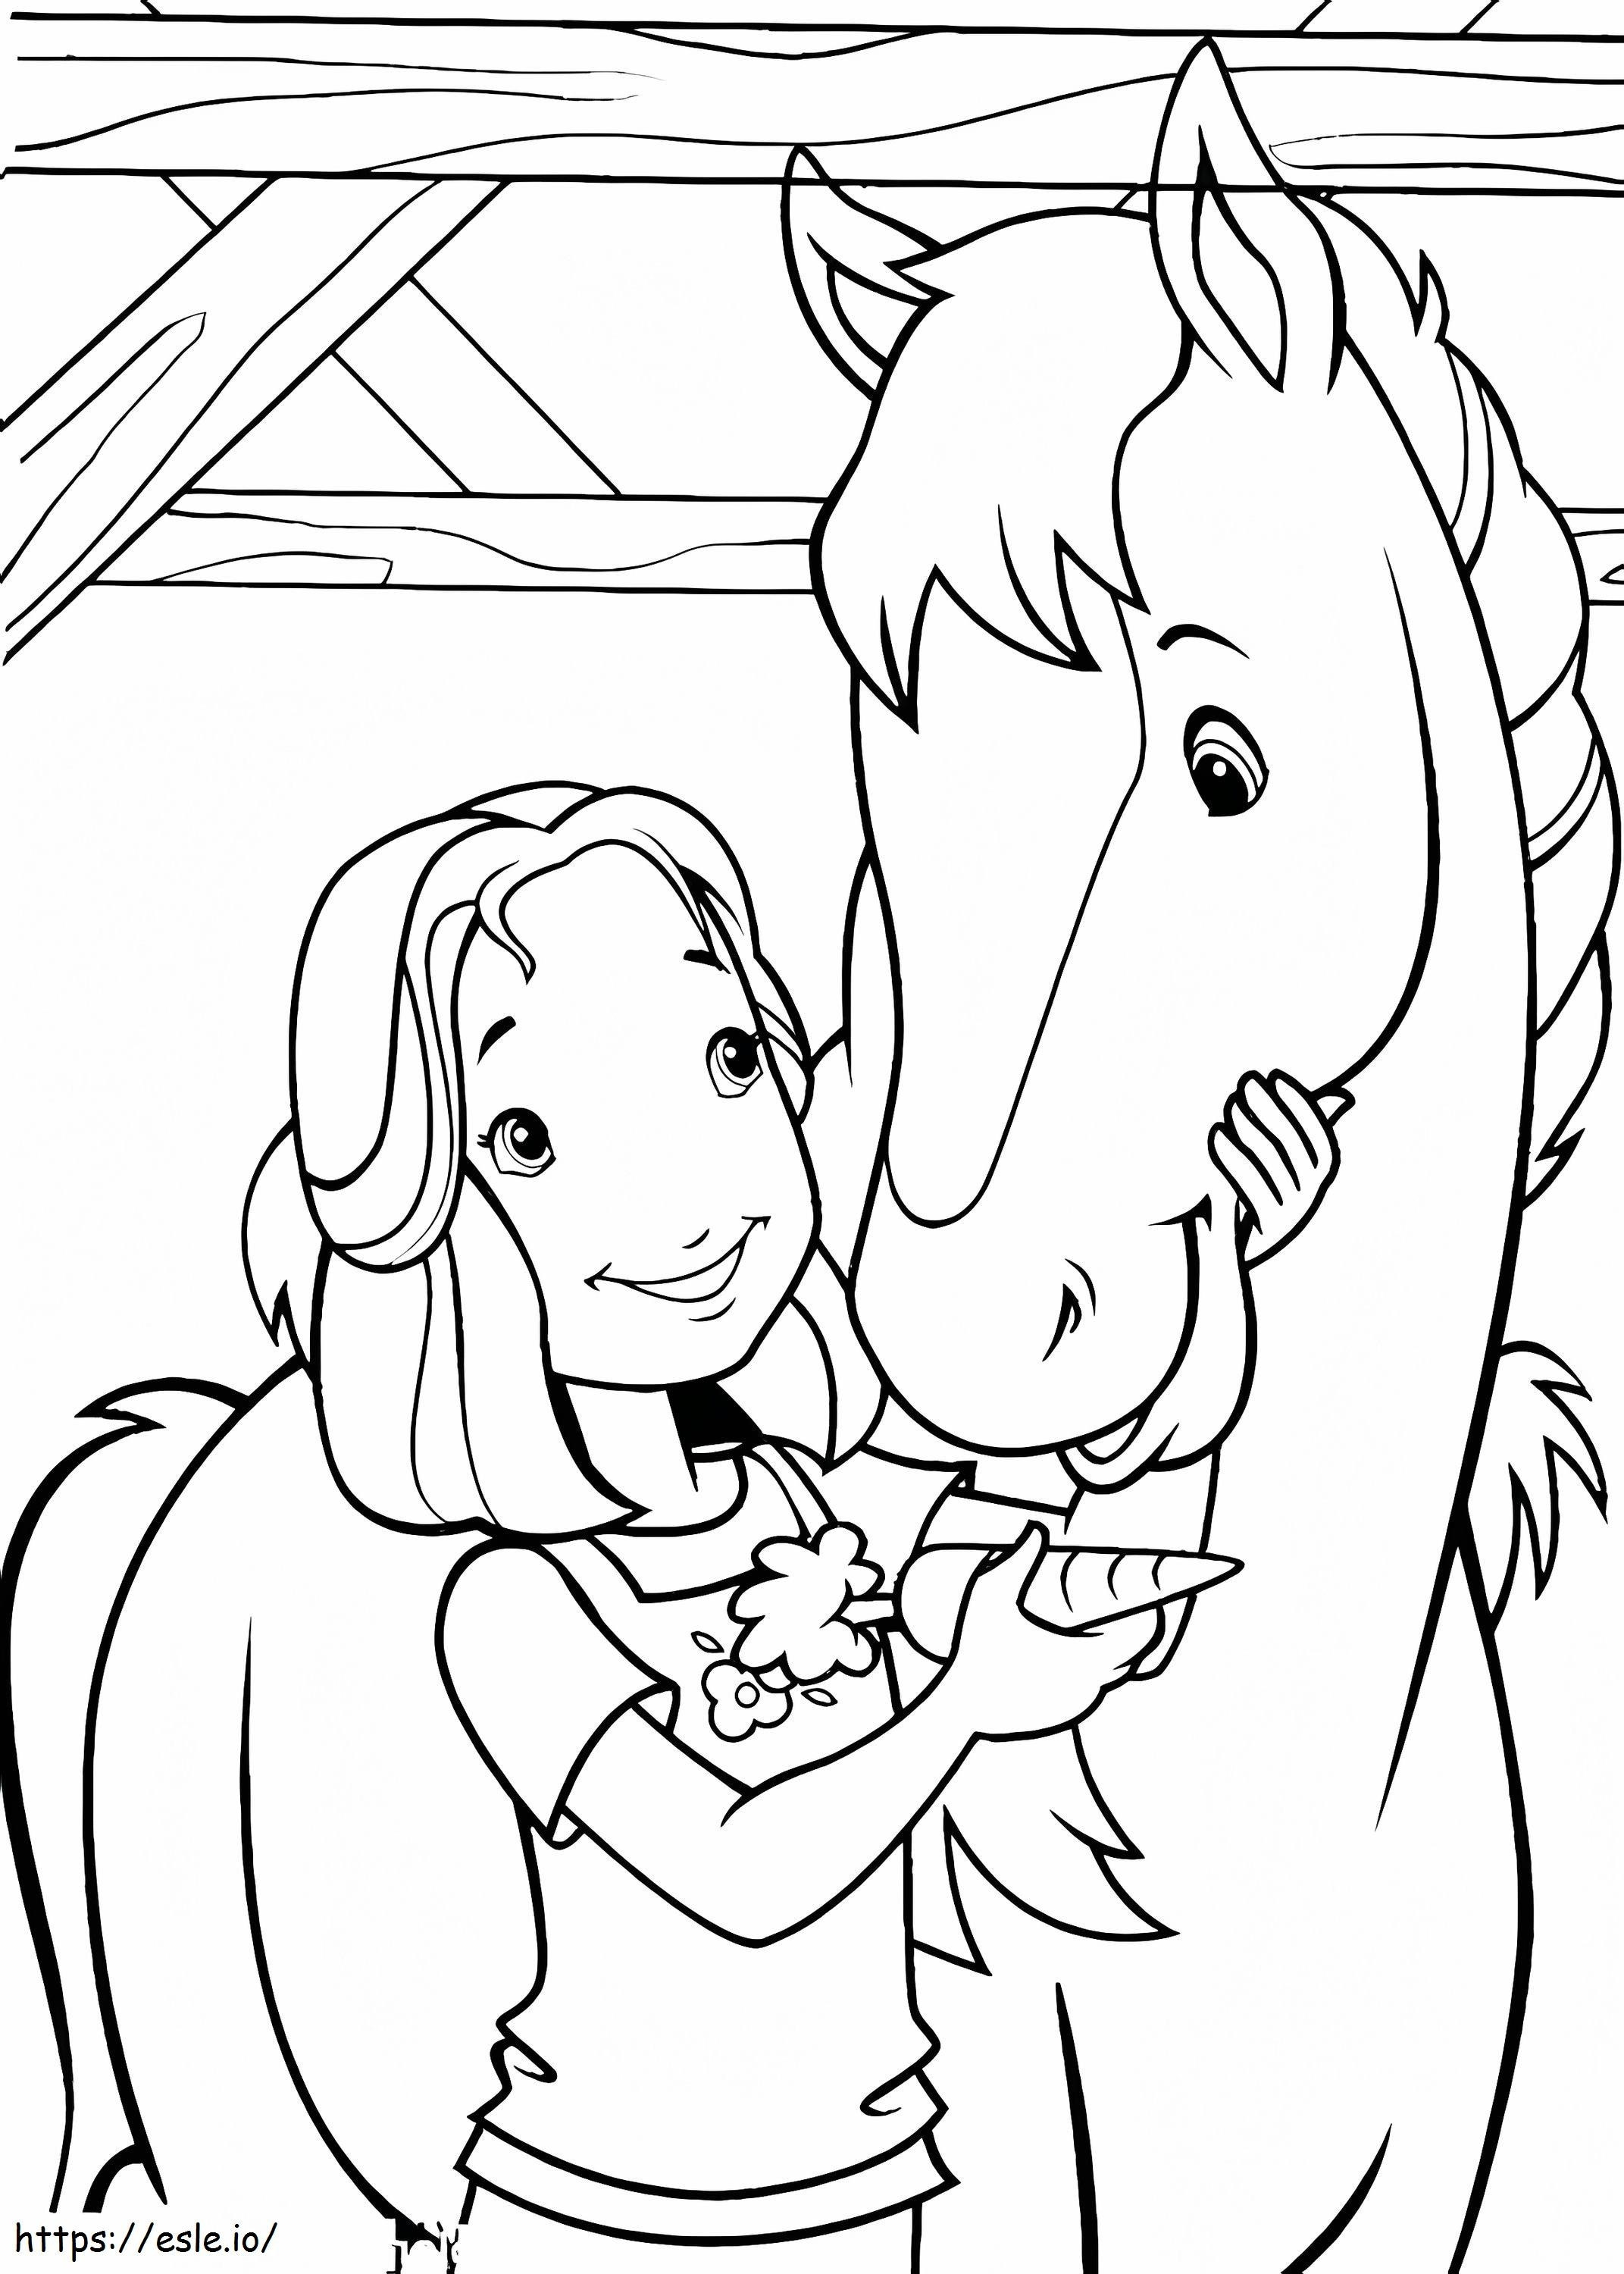 1541811688 Free Horses Horse Holly Friend Feeding Her Cider With Carrot Sheet coloring page